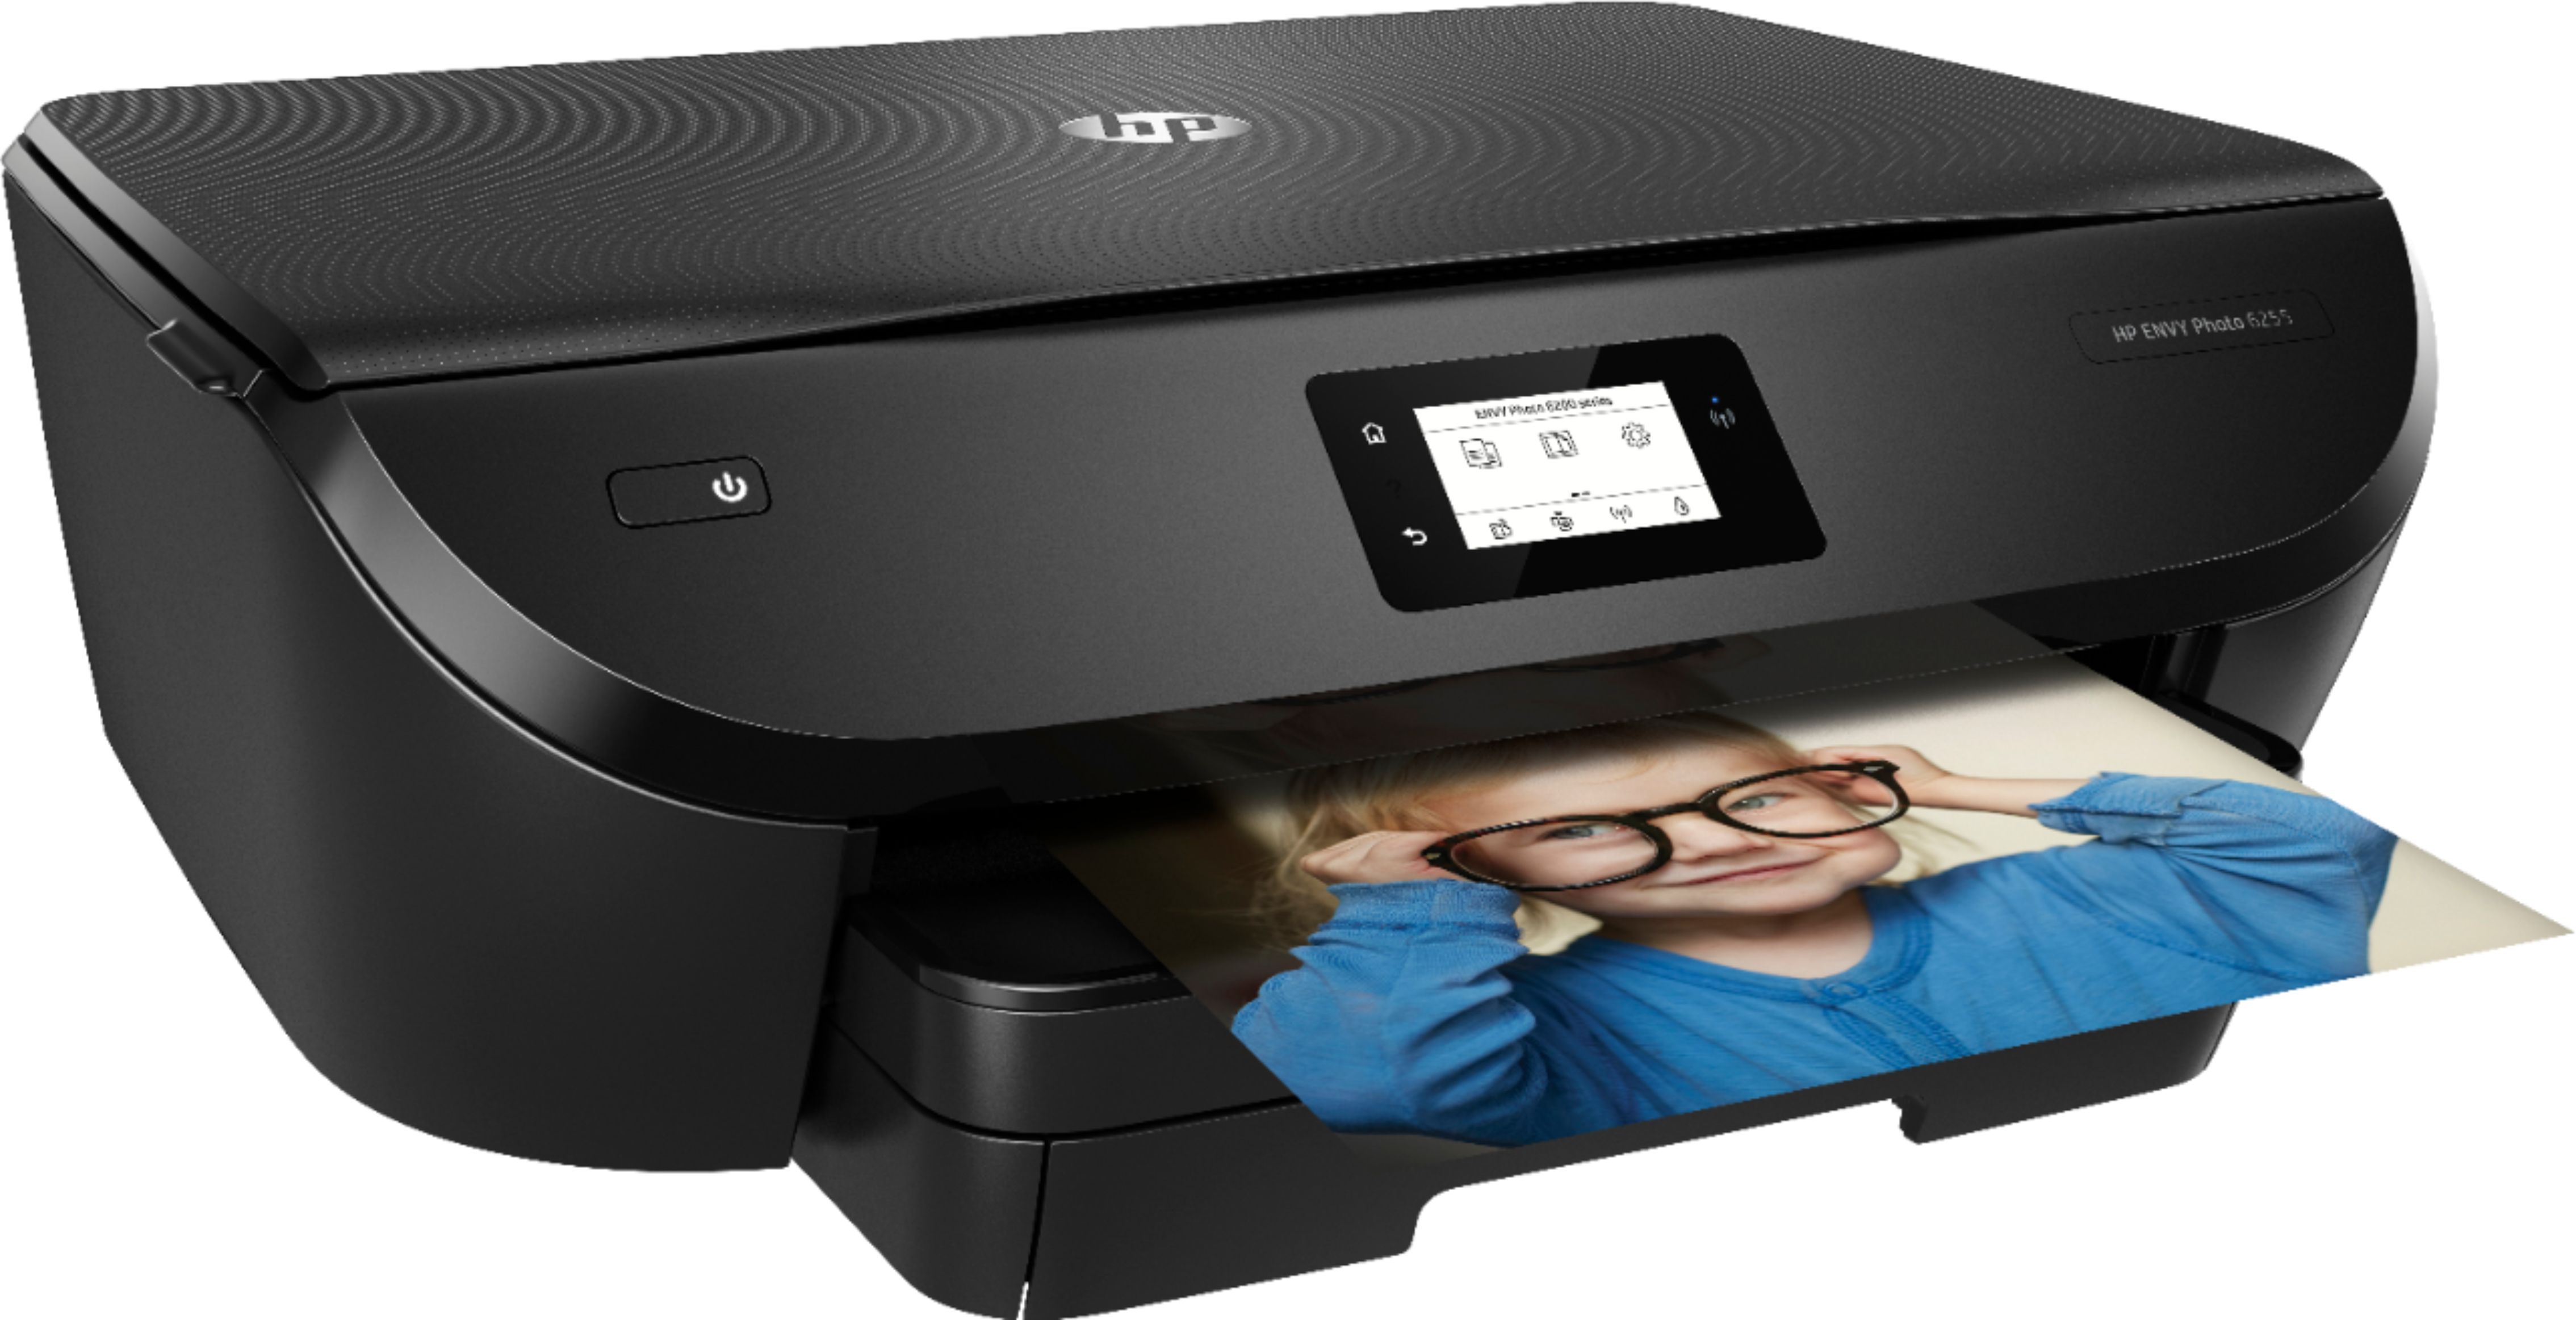 HP ENVY Photo 6255 All in One Photo Printer with Wireless Printing K7G18A Instant Ink ready 